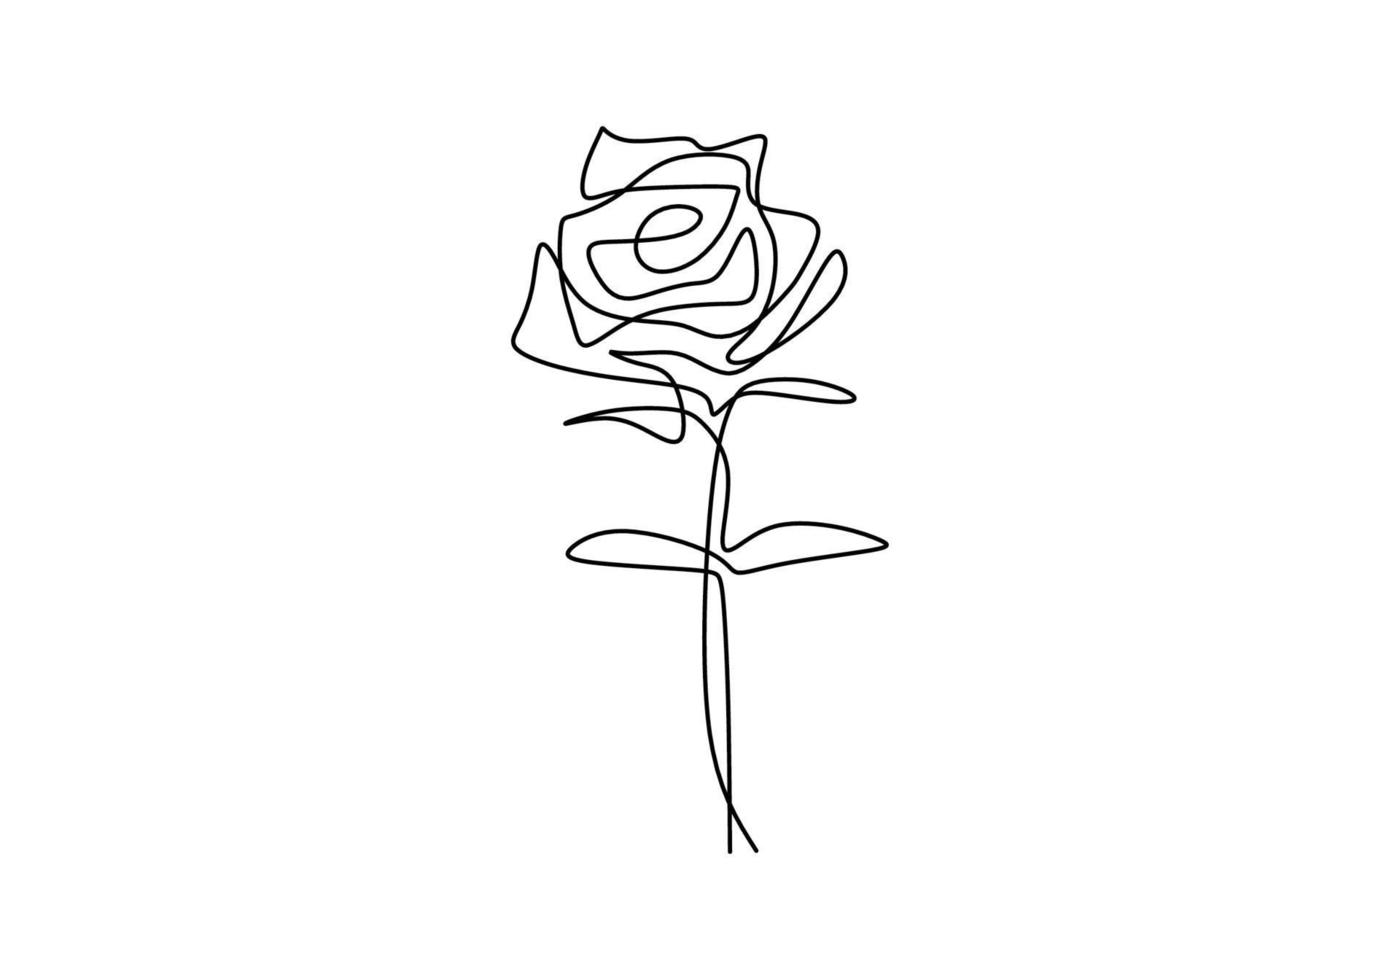 One continuous single line rose design hand drawn minimalism style. Beautiful rose symbol of love isolated on white background. Romantic flower theme. Vector design illustration